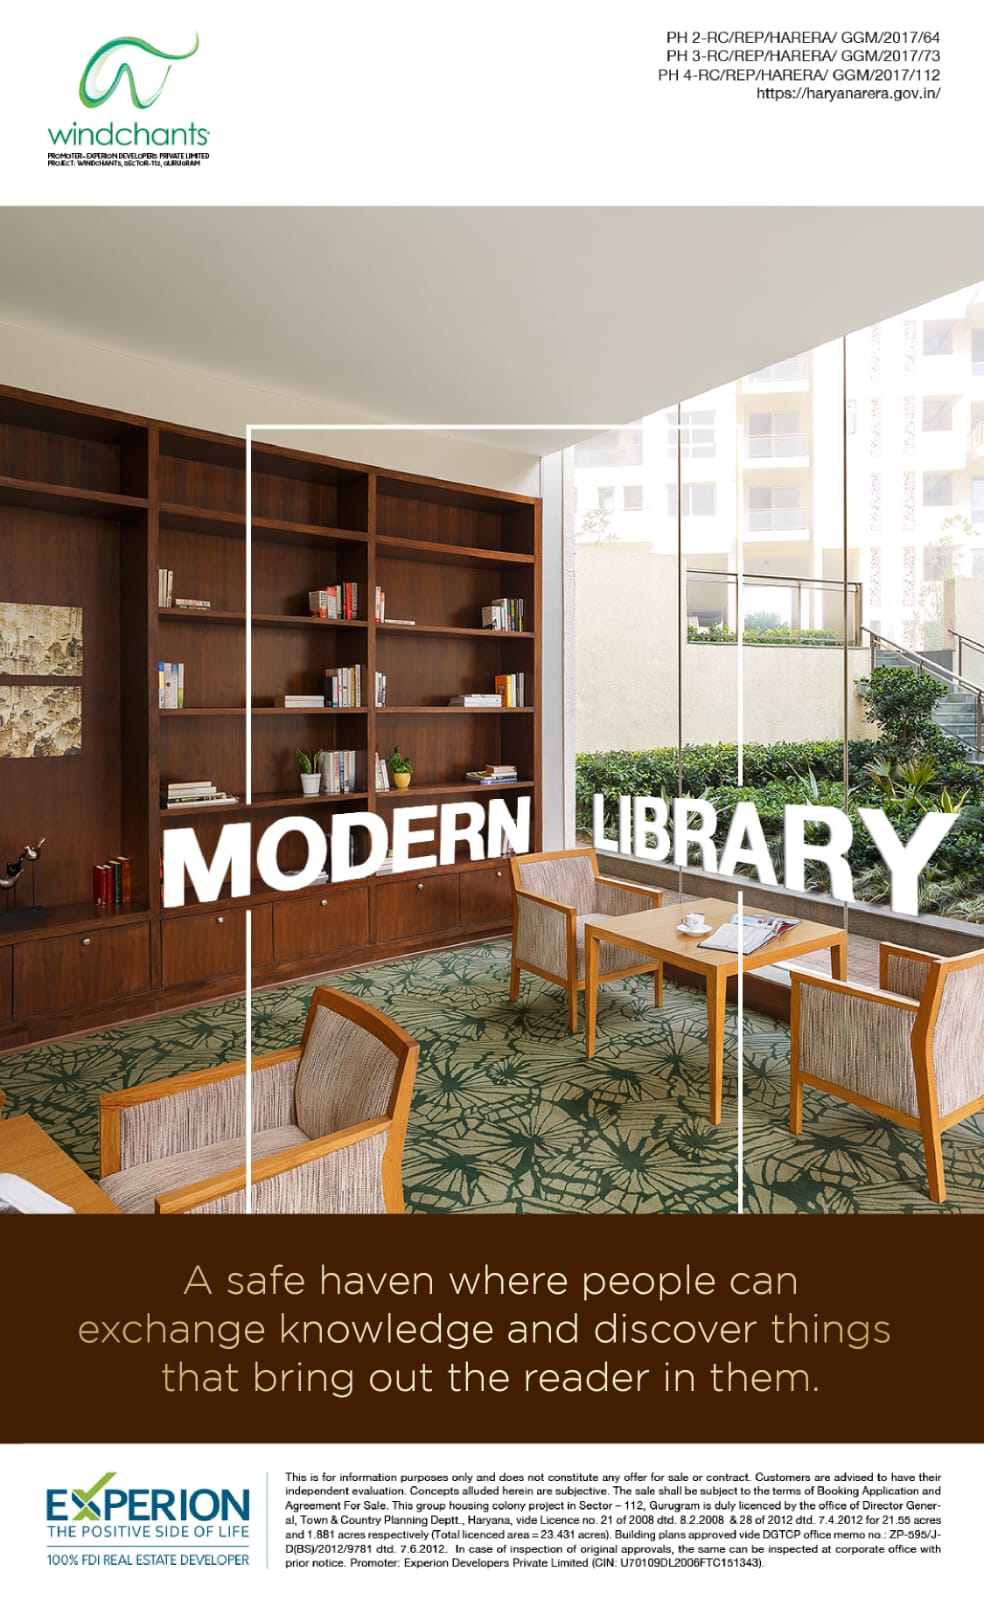 Experion Windchants presenting modern library in Sector 11, Gurgaon